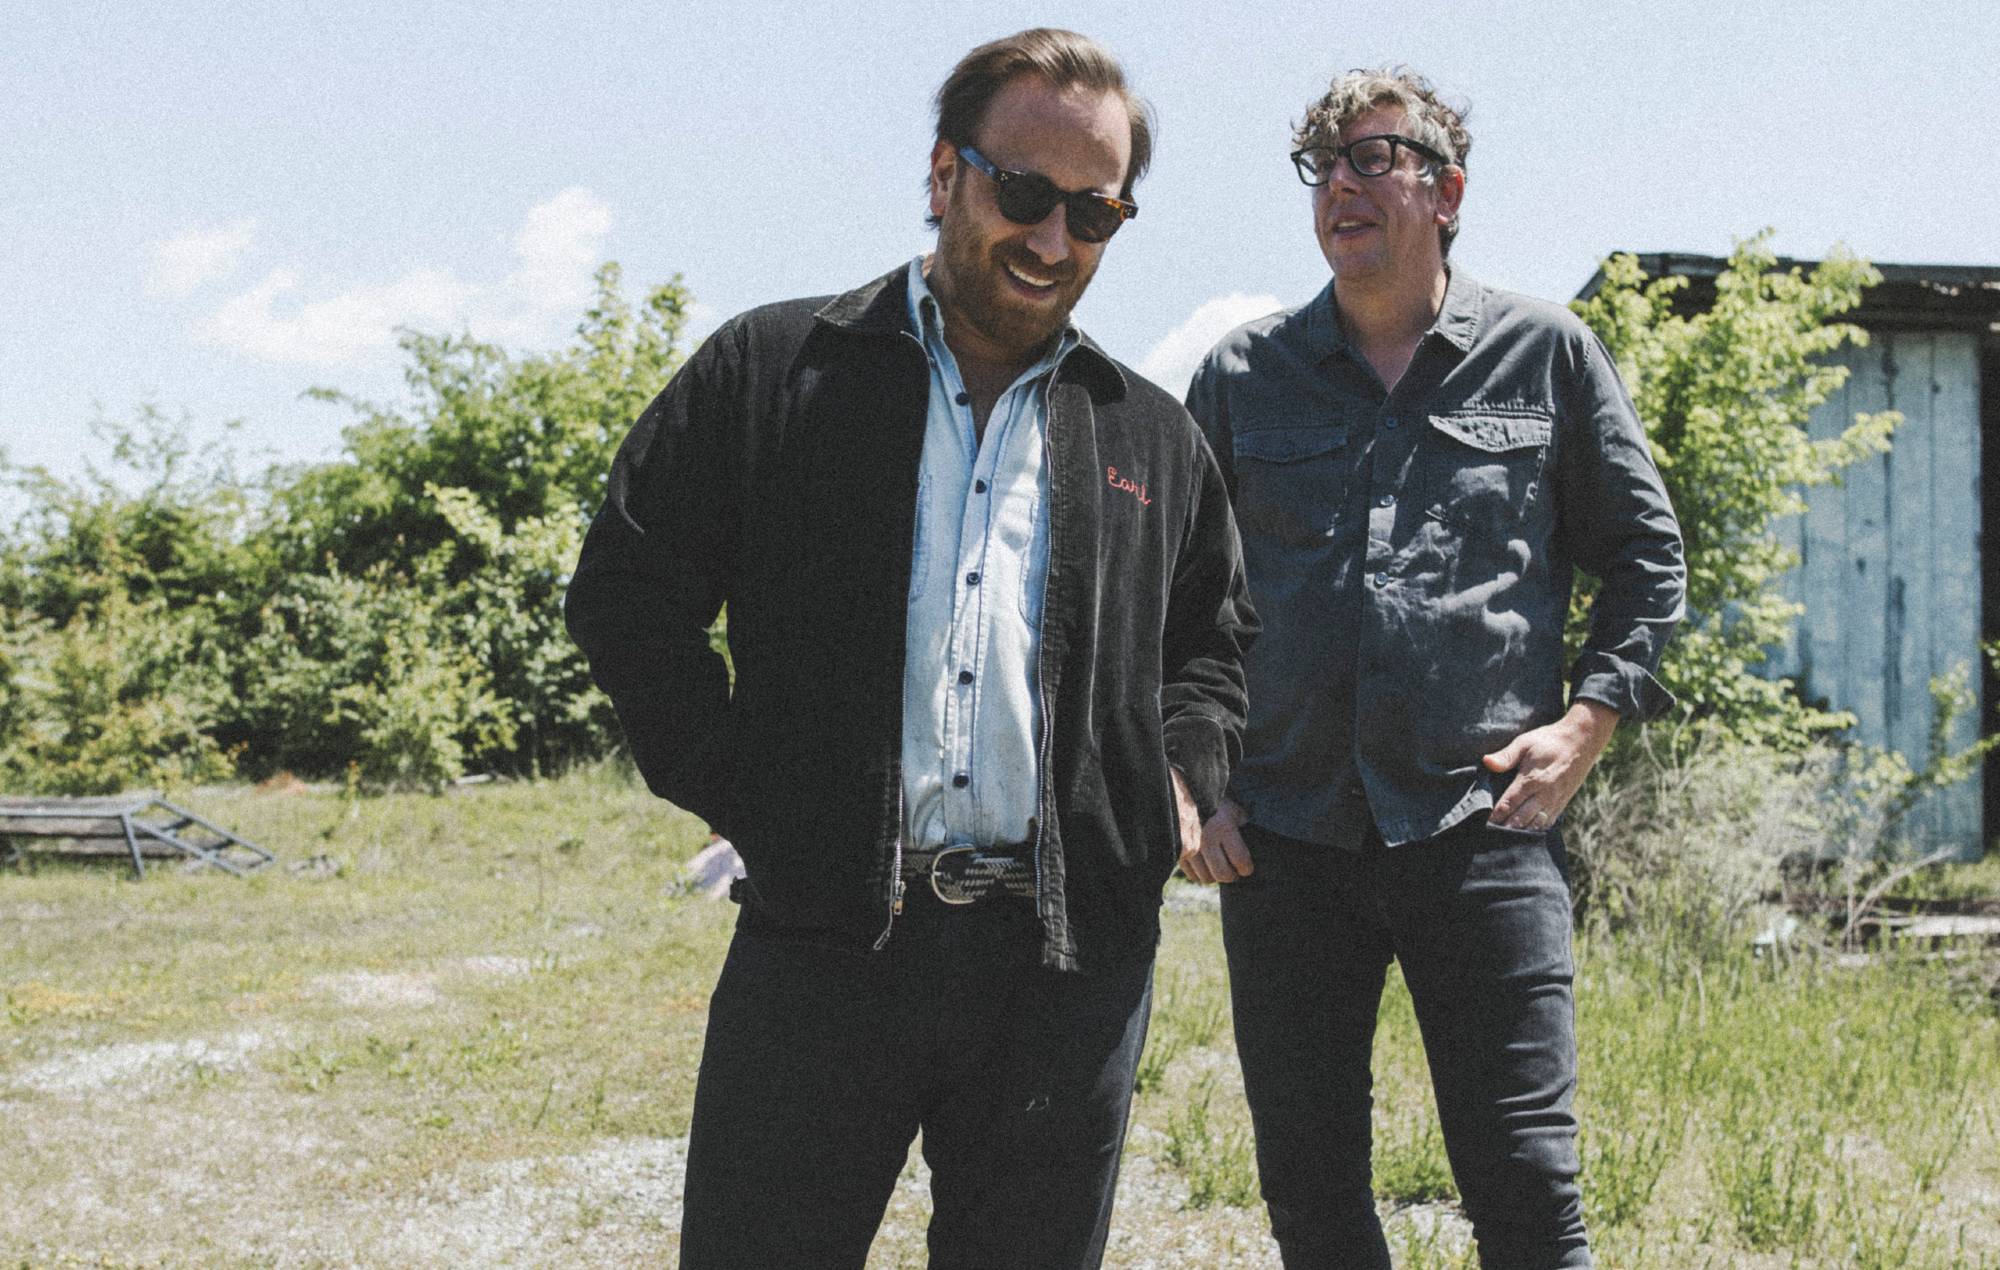 The Black Keys on accidental new LP ‘Delta Kream’: “We never thought of it as an album”